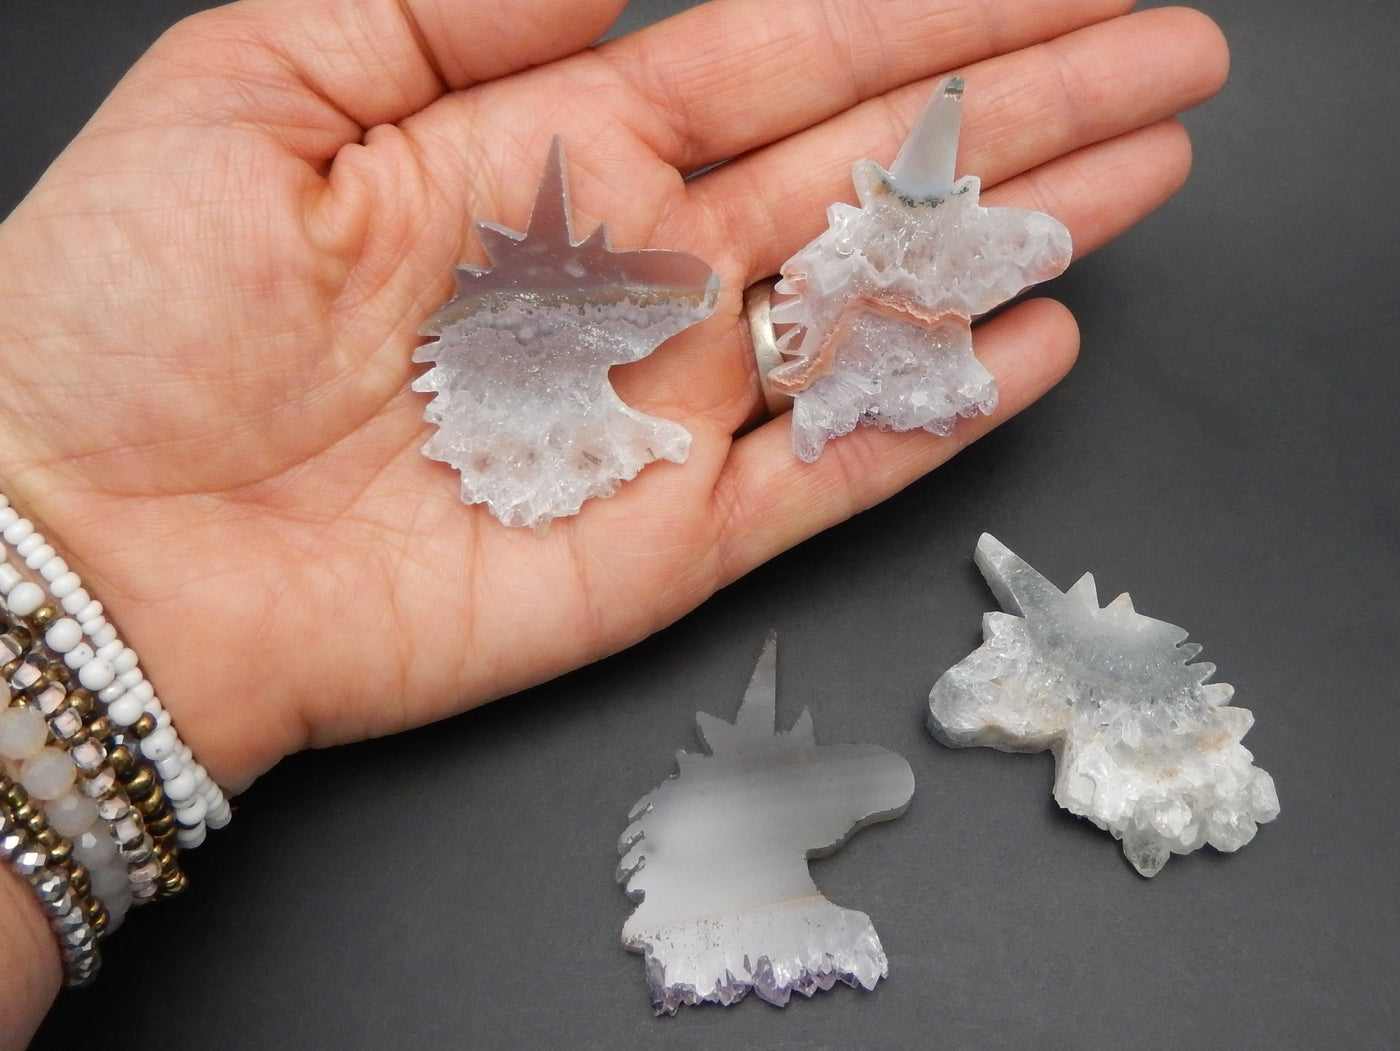 Amethyst Stalactite Unicorn Shaped Cabochons in hand for size reference